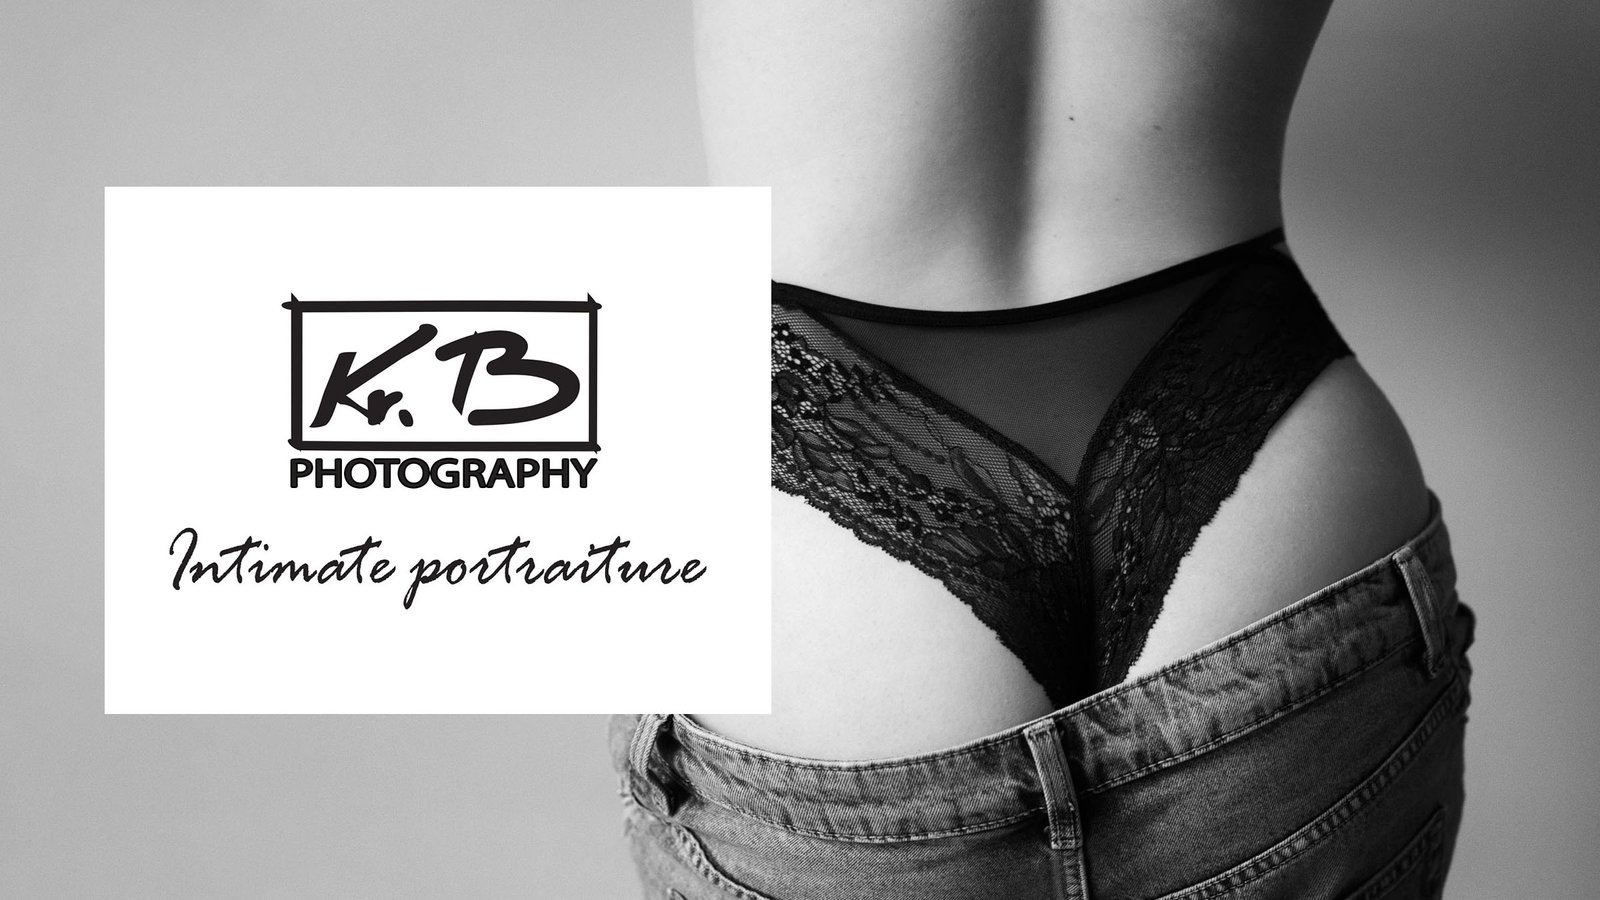 KrB Photography, cover photo 11